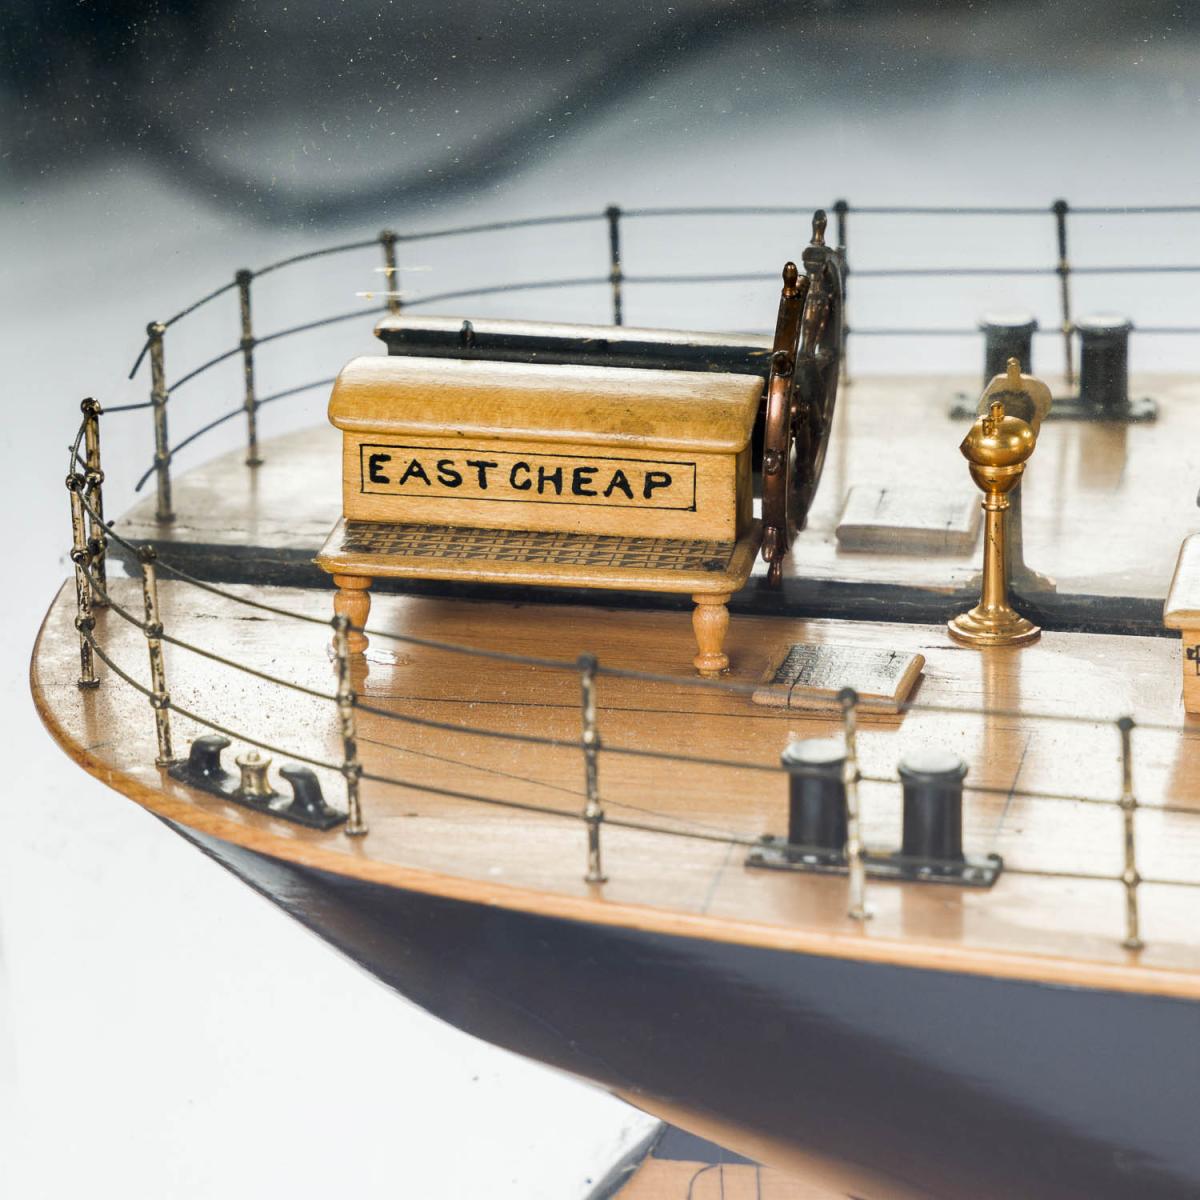 Half hull shipbuilder's model of S.S. Eastcheap by Mackie & Thomson